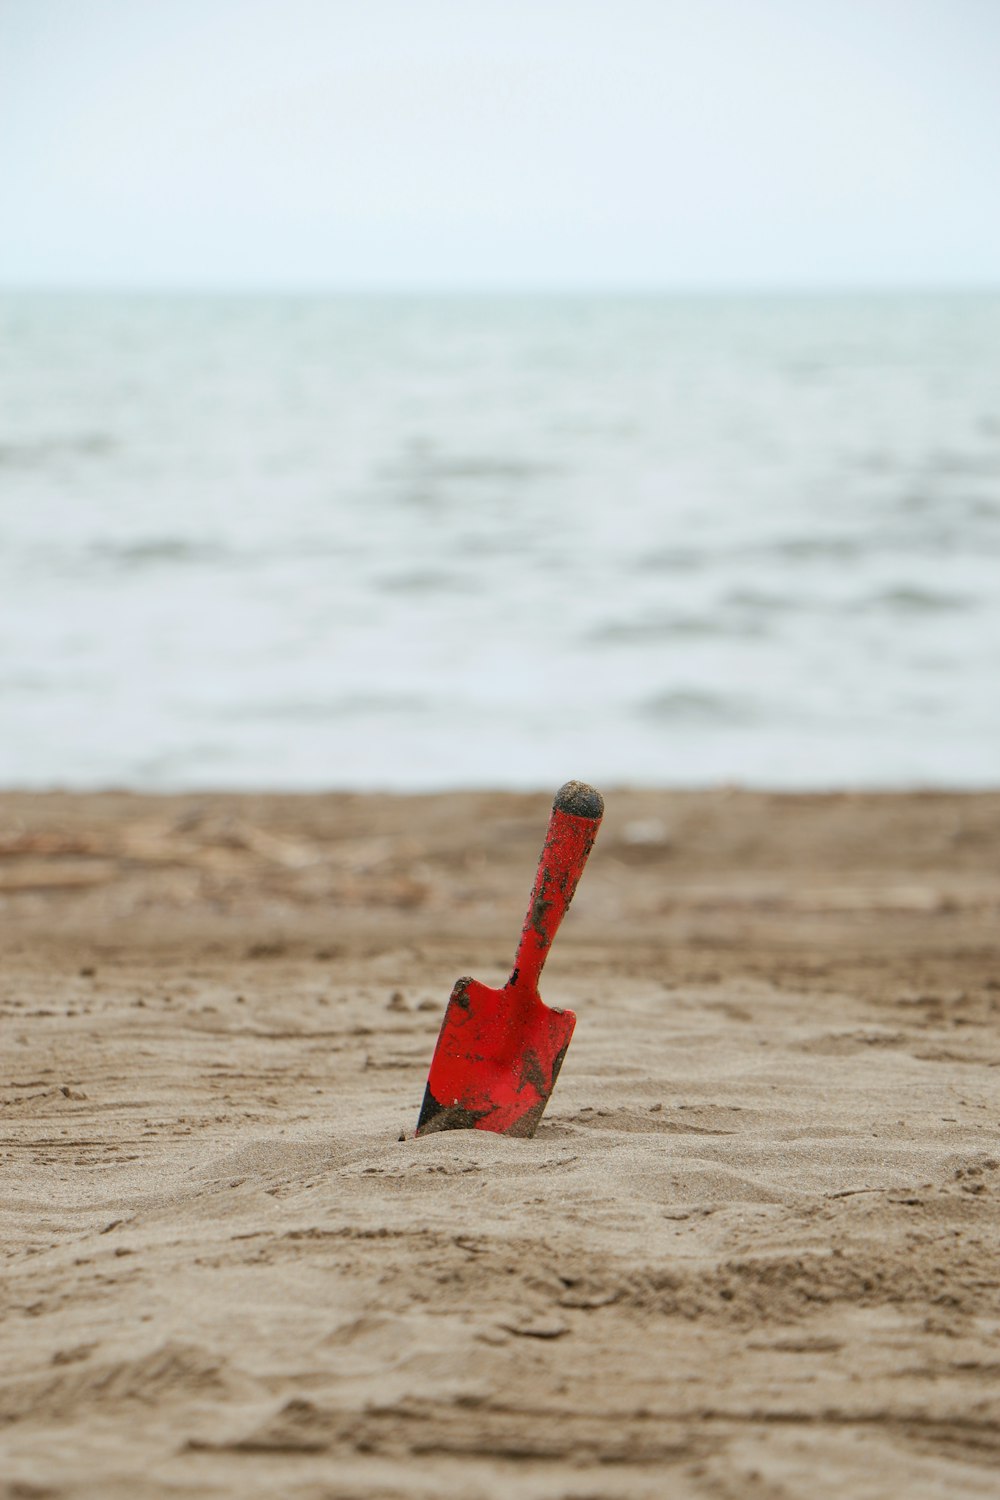 red plastic shovel on brown sand near body of water during daytime